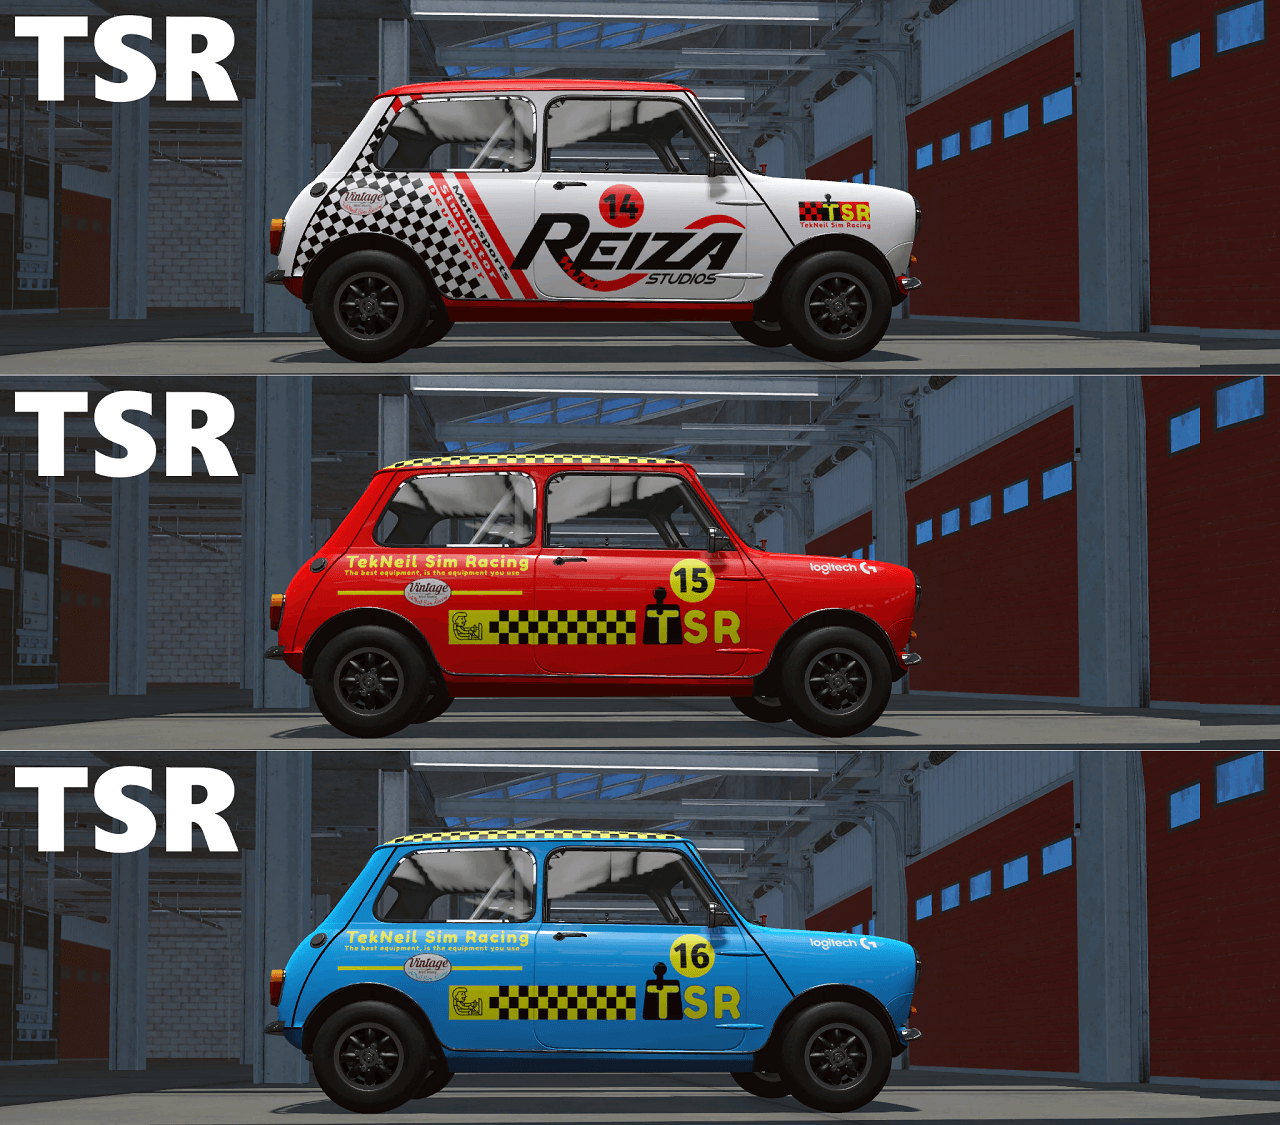 65 Mini Cooper S Livery - Murray Walker Edition